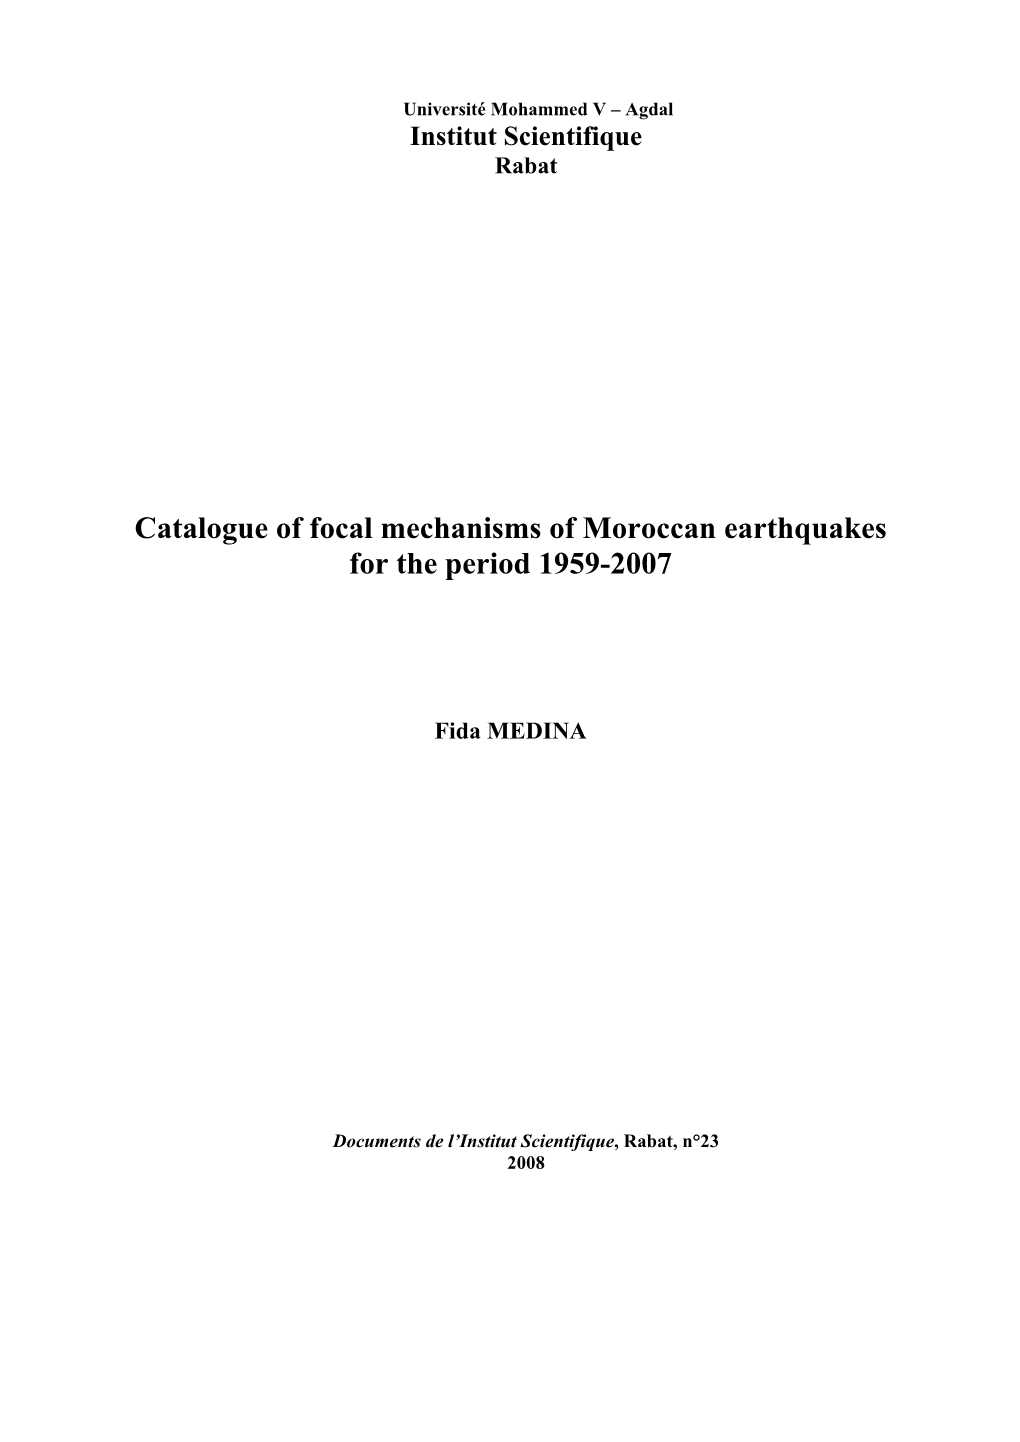 Catalogue of Focal Mechanisms of Moroccan Earthquakes for the Period 1959-2007